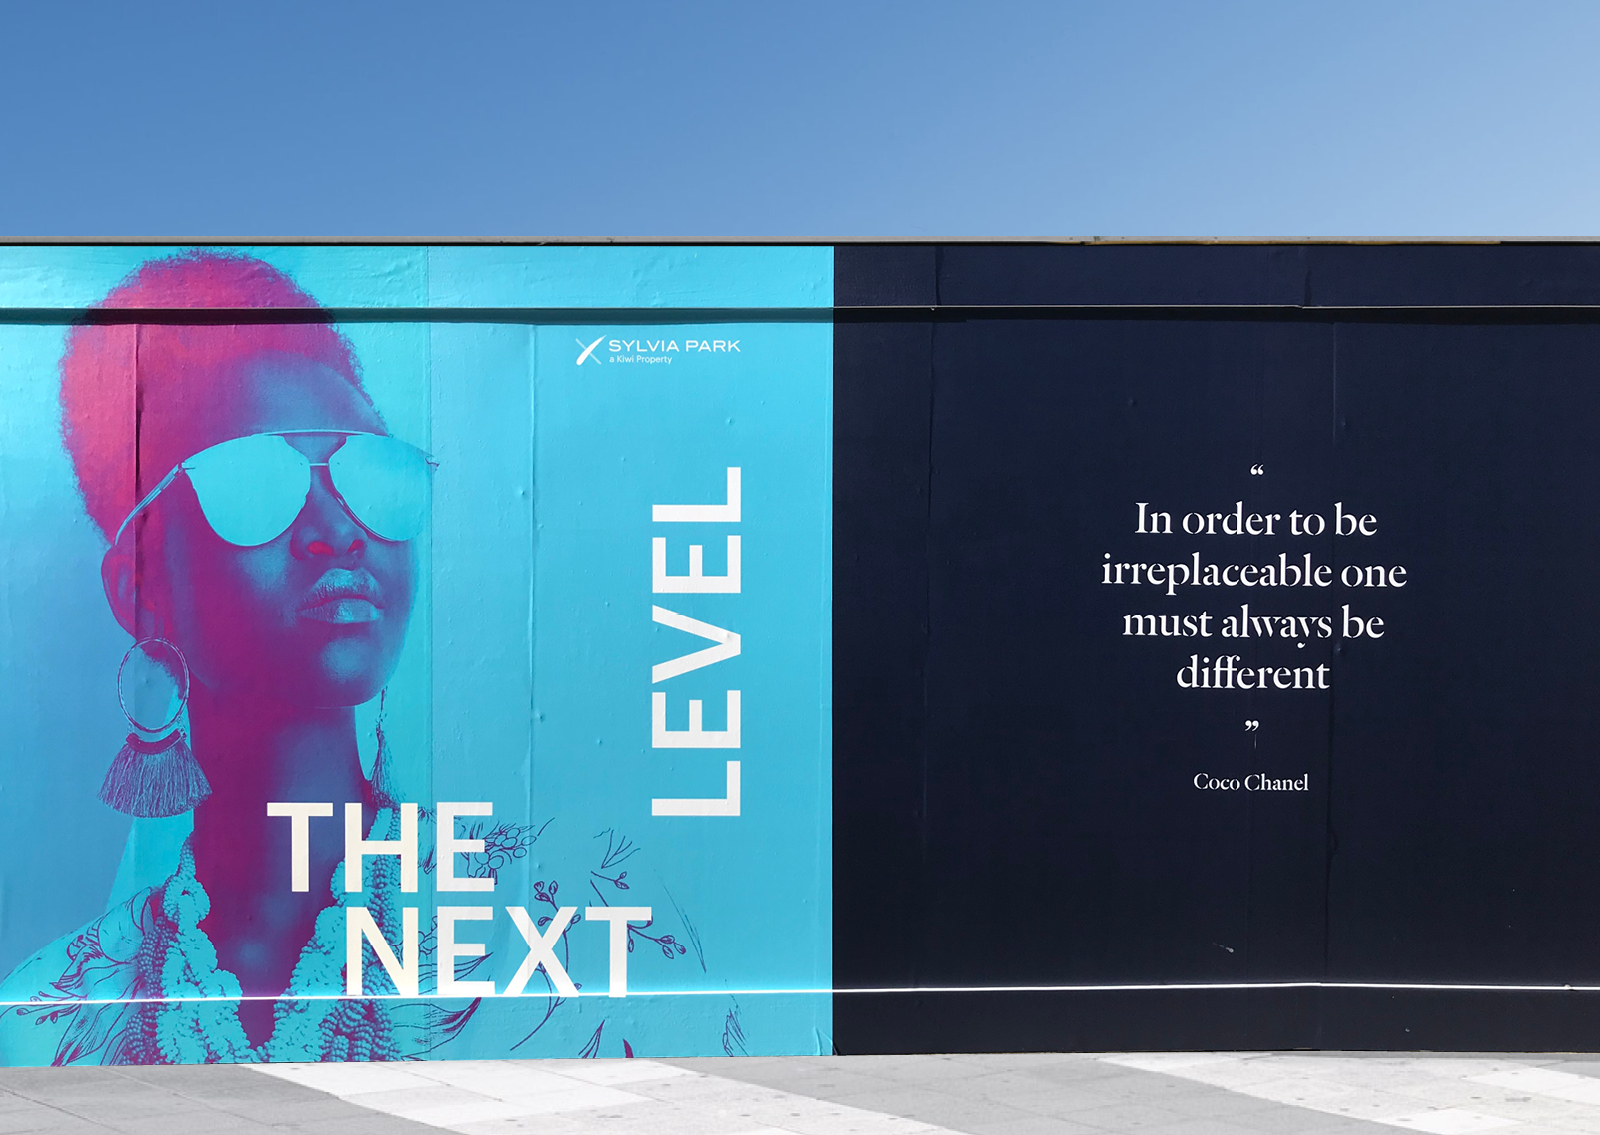 Eye-catching quote on hoarding design for Sylvia Park